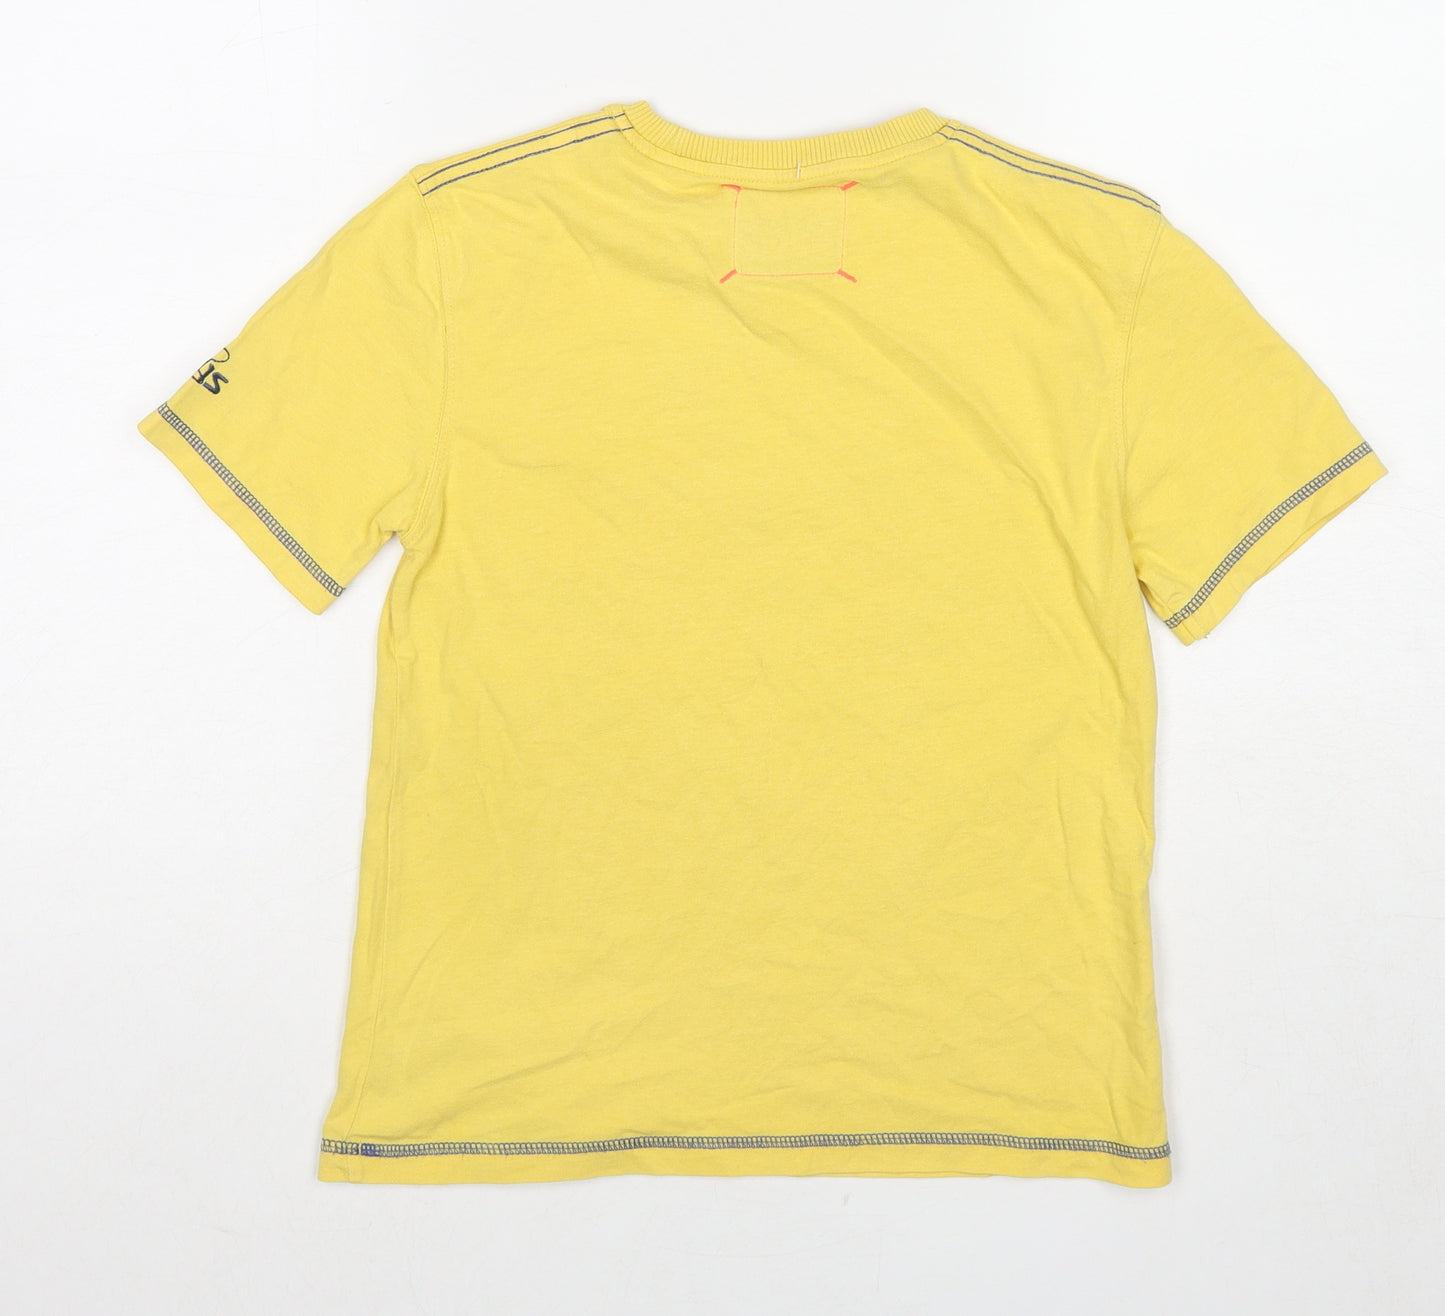 Marks and Spencer Boys Yellow Cotton Basic T-Shirt Size 10 Years Round Neck Pullover - Lewis Hamilton